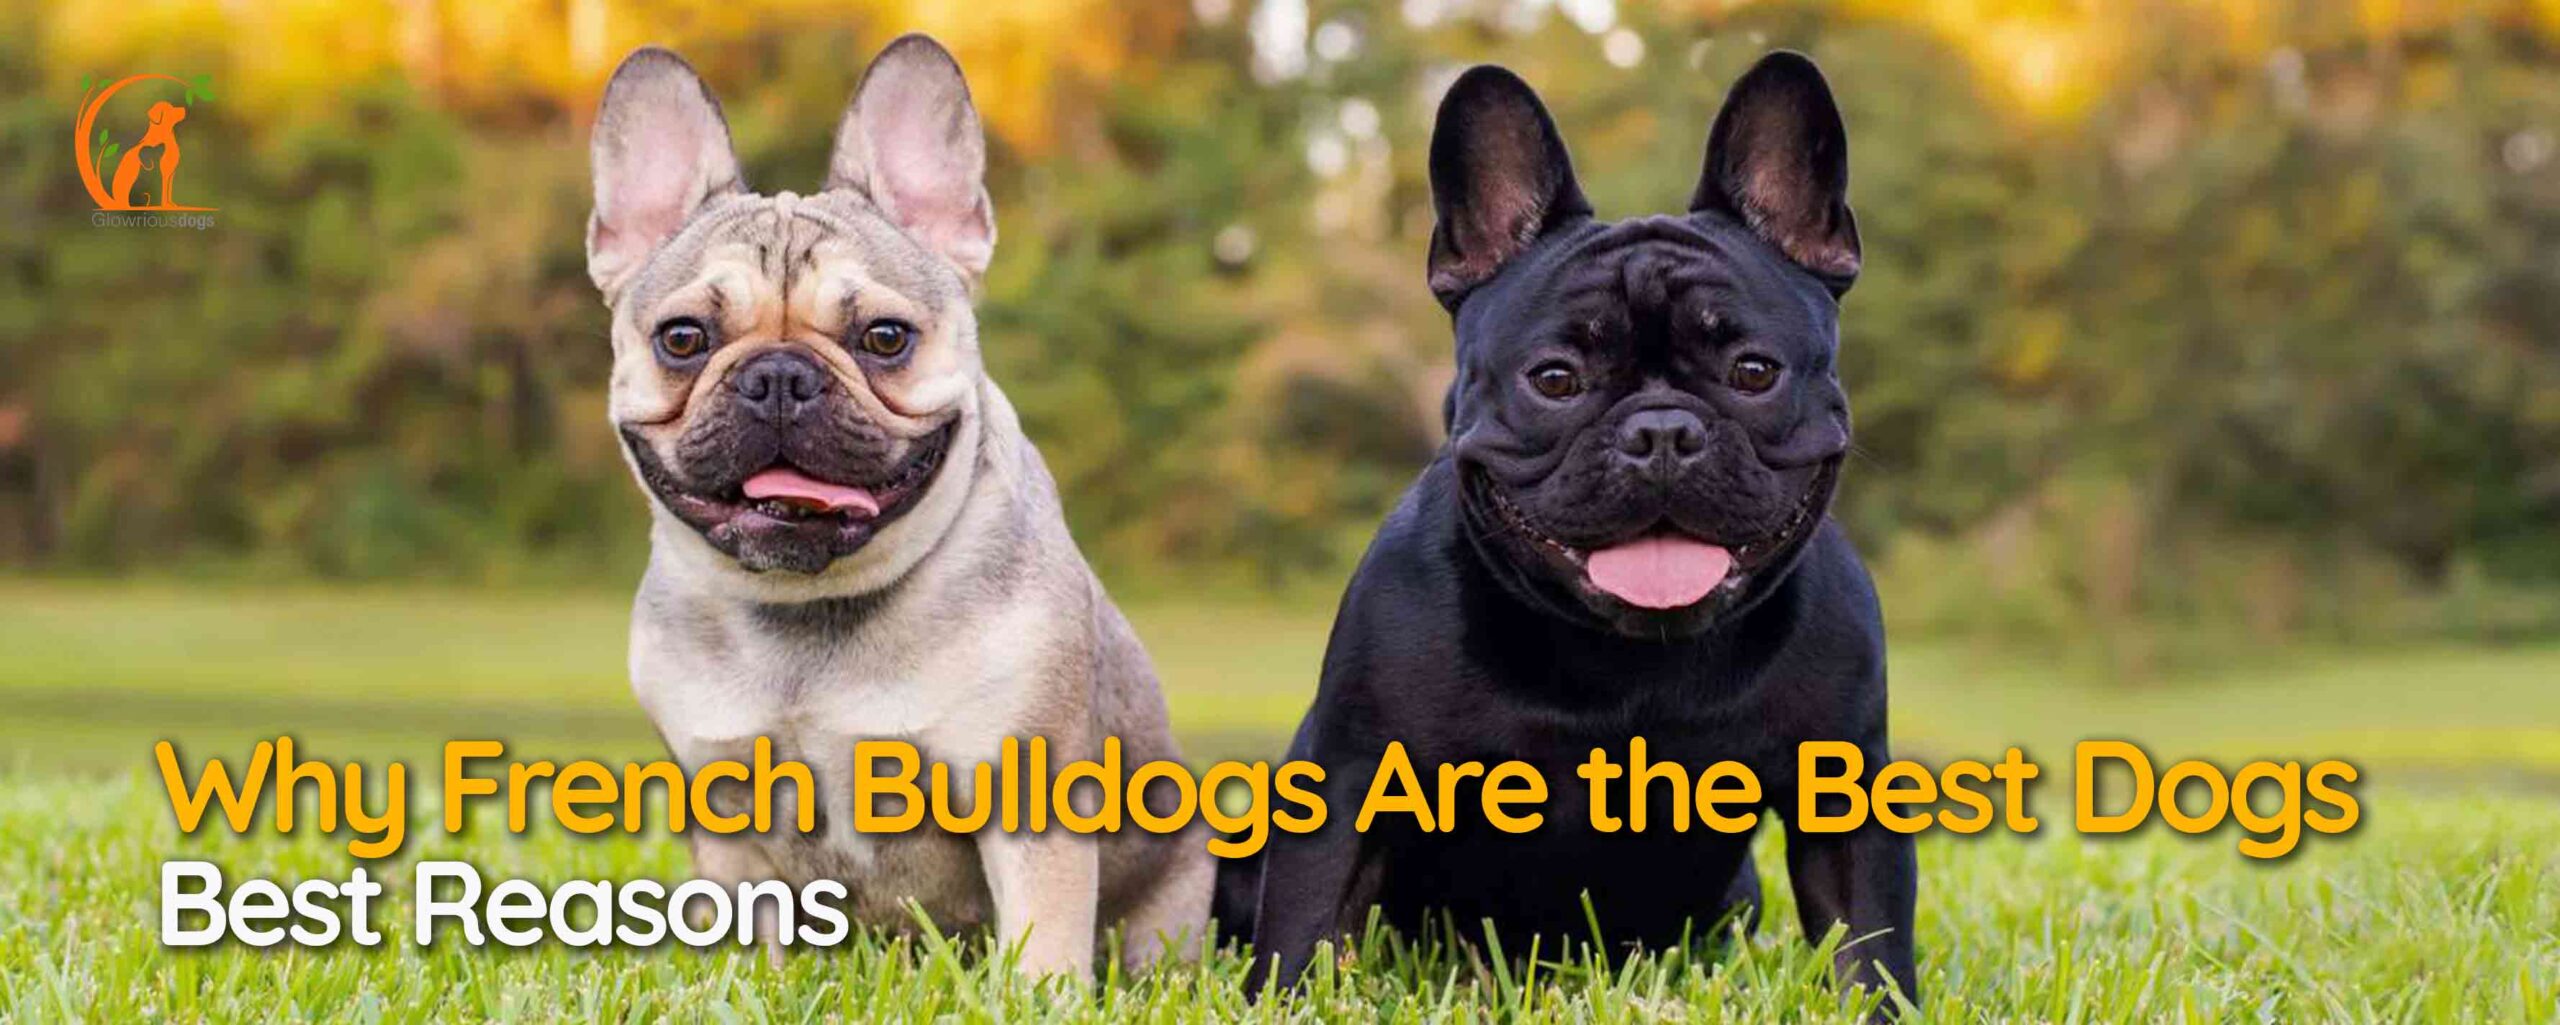 Why French Bulldogs Are the Best Dogs - Best Reasons